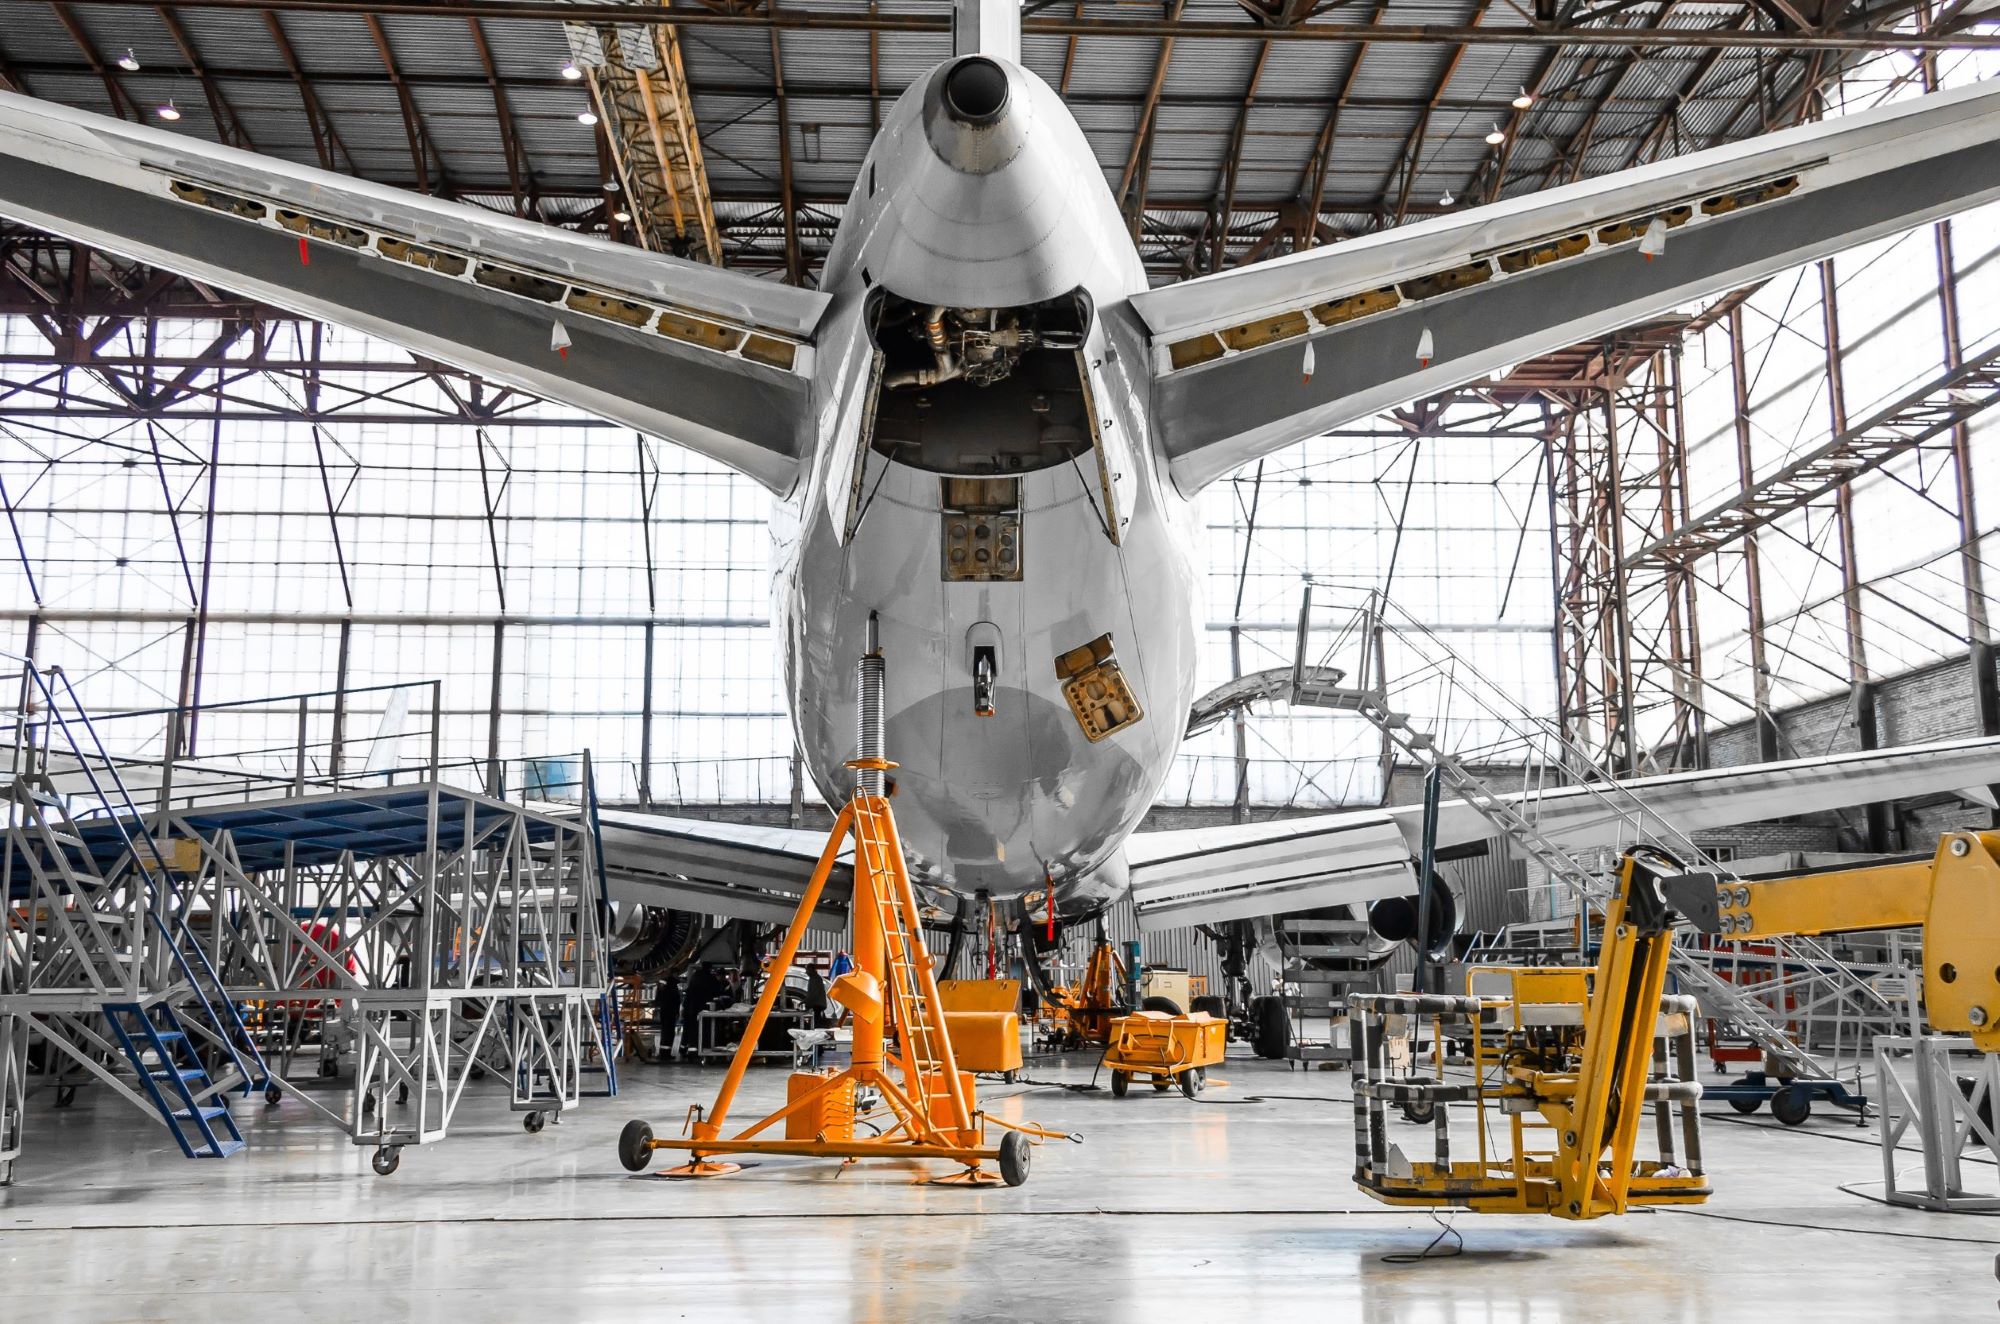 CAE expands Aircraft Technical Support Services in APAC